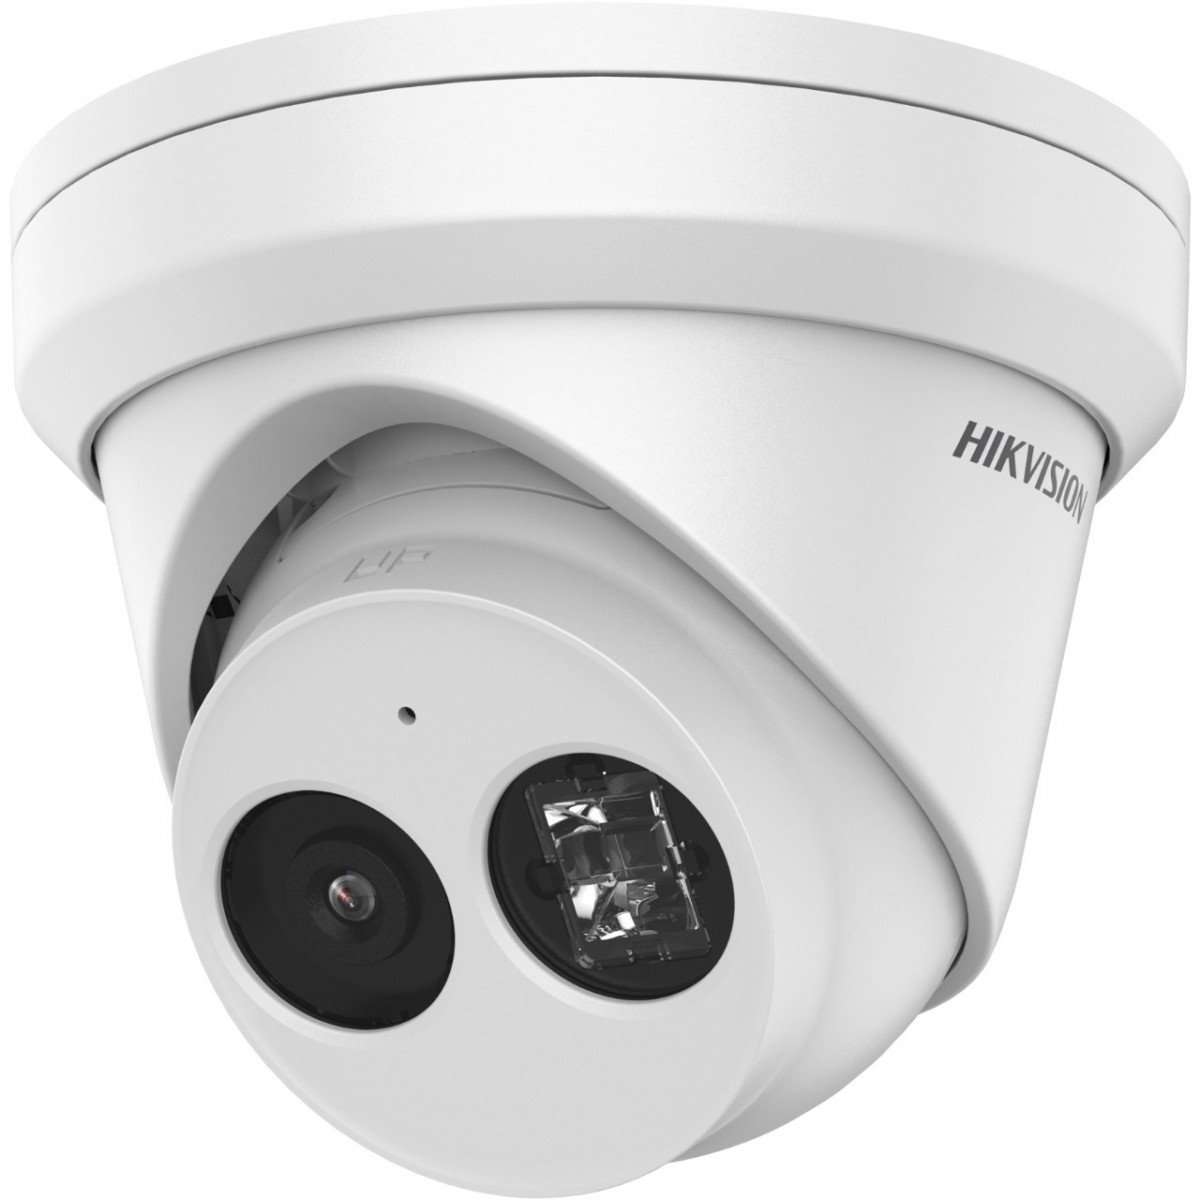 Hikvision Digital Technology DS-2CD2343G2-I - IP security camera - Outdoor - Wired - FCC SDoC (47 CFR 15 - B); CE-EMC (EN 55032: